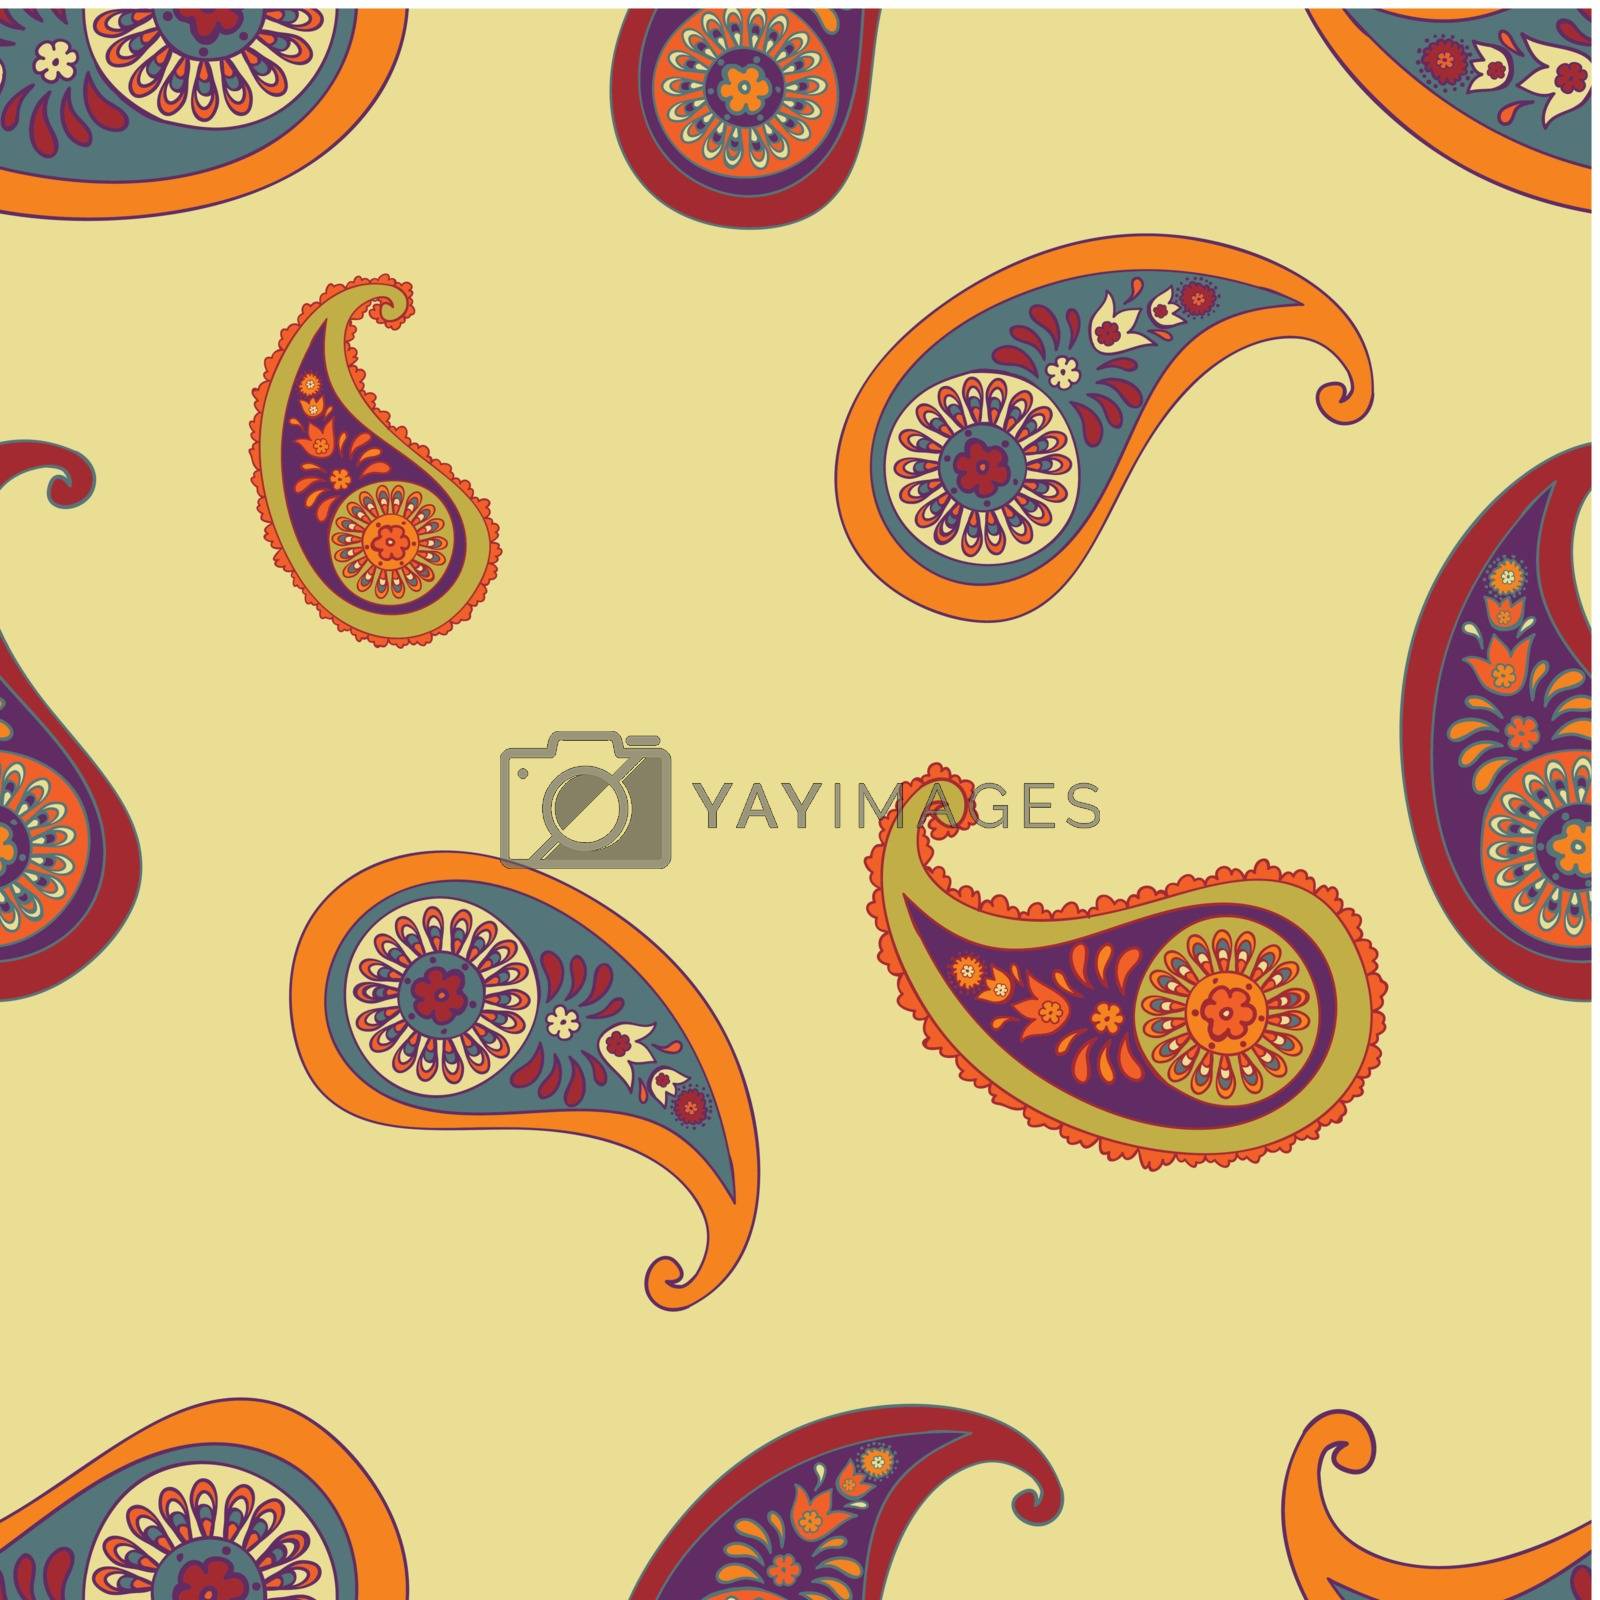 Royalty free image of paisley seamless background by lolya1988